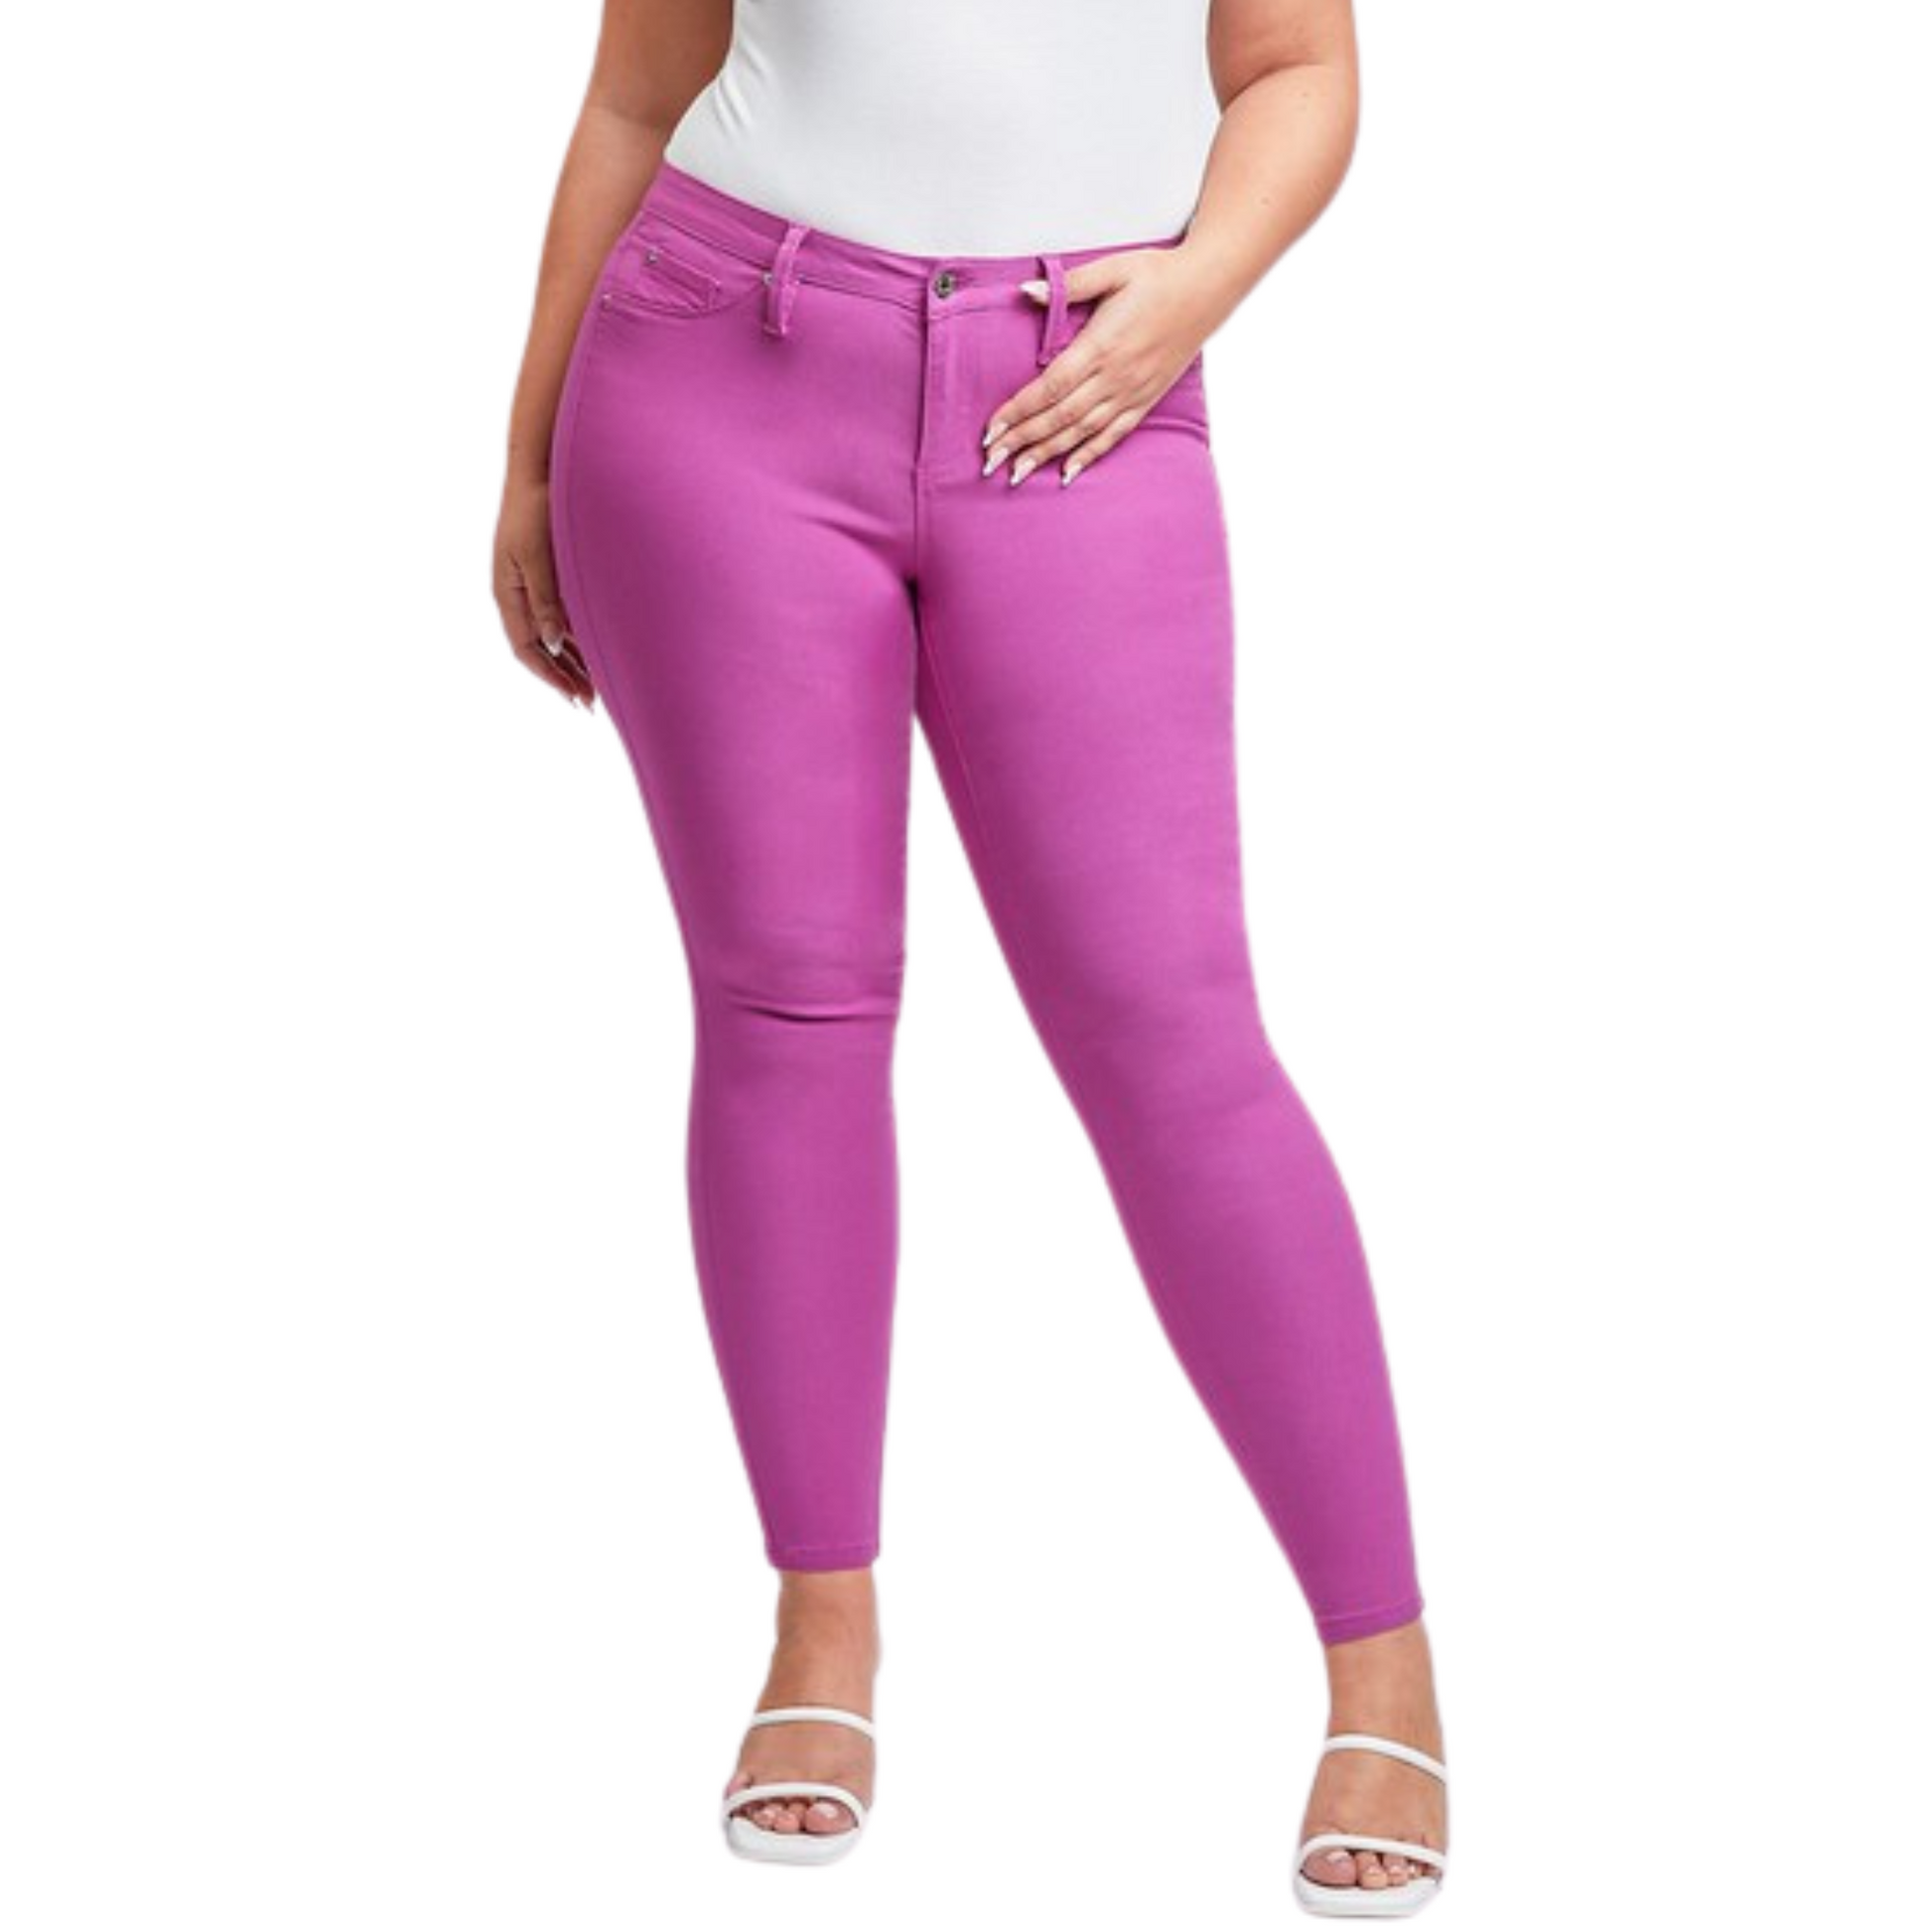 The Women's Hyper Stretch Skinny Jeans are designed for optimal comfort and a flattering fit. Made with Hyper Stretch technology, these plus size jeans are available in a variety of colors and provide superior comfort and flexibility. Whether you are heading out for a day of errands or lounging at home, these jeans are the ideal choice for style and comfort.